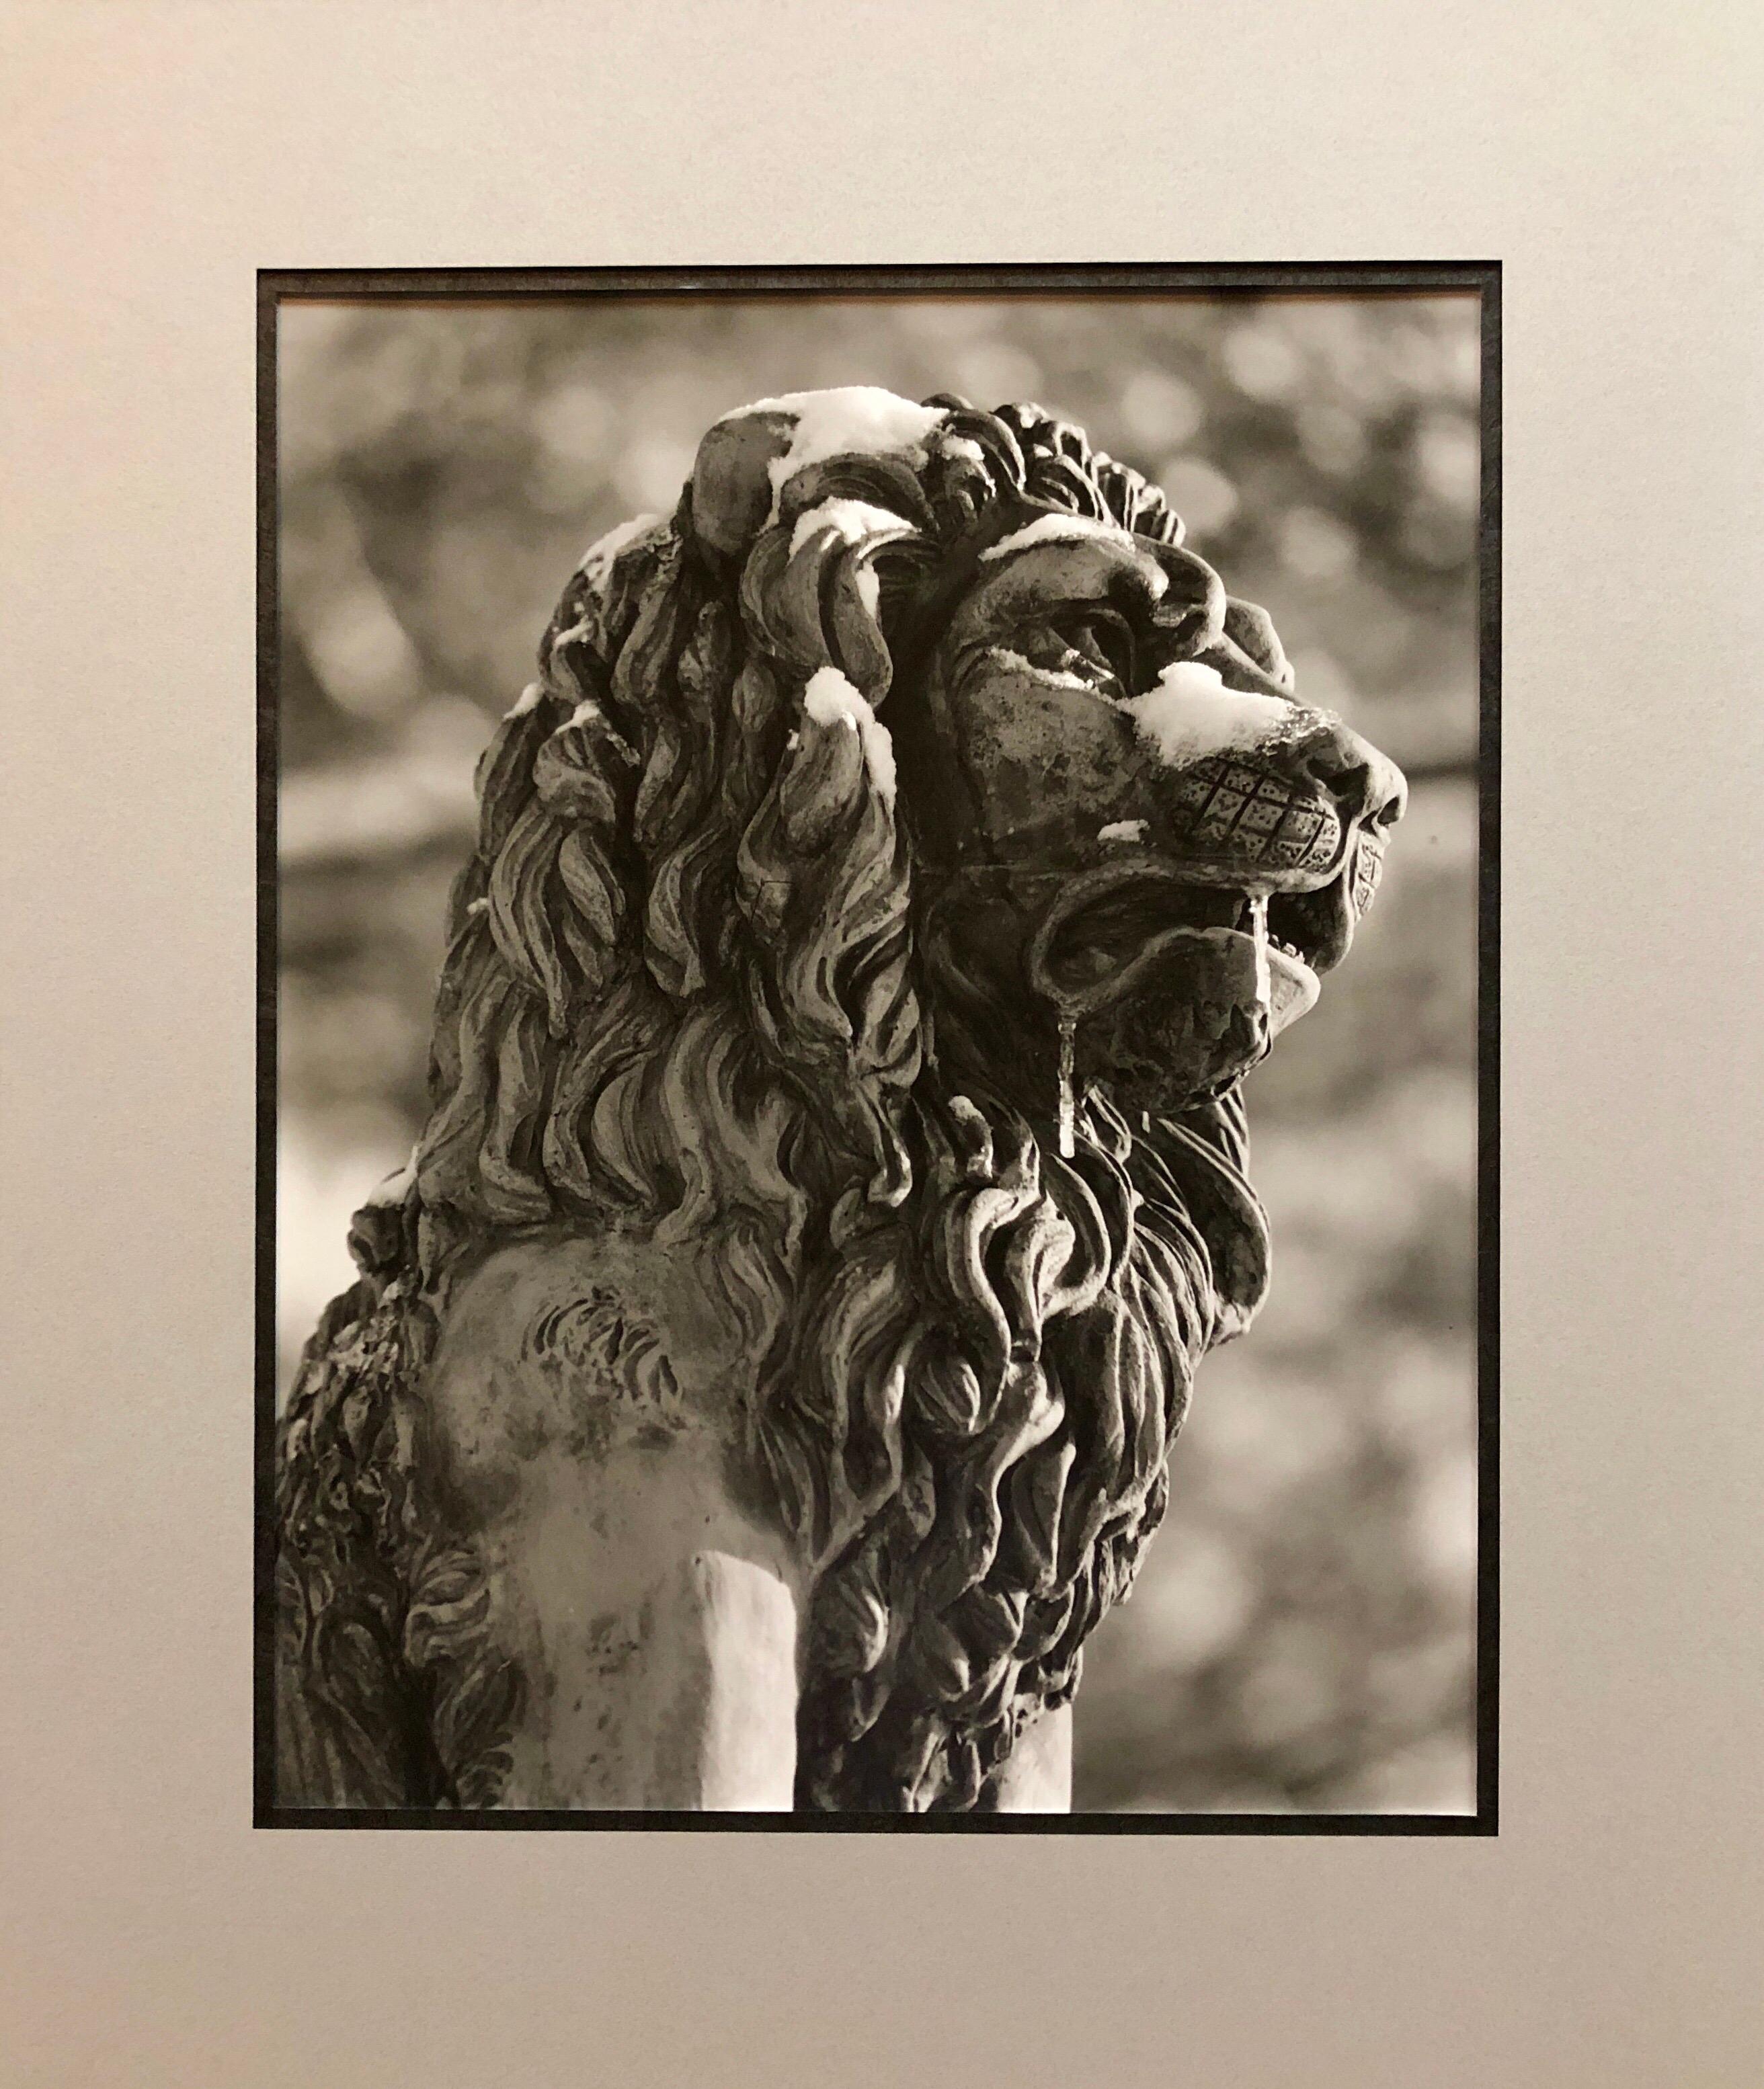 Vintage Judaic piece by Jewish American-Israeli artist. A figure of a lion found as a sculptural detail on a building in Jerusalem Israel, the city of all three major western religions. Judaica. 